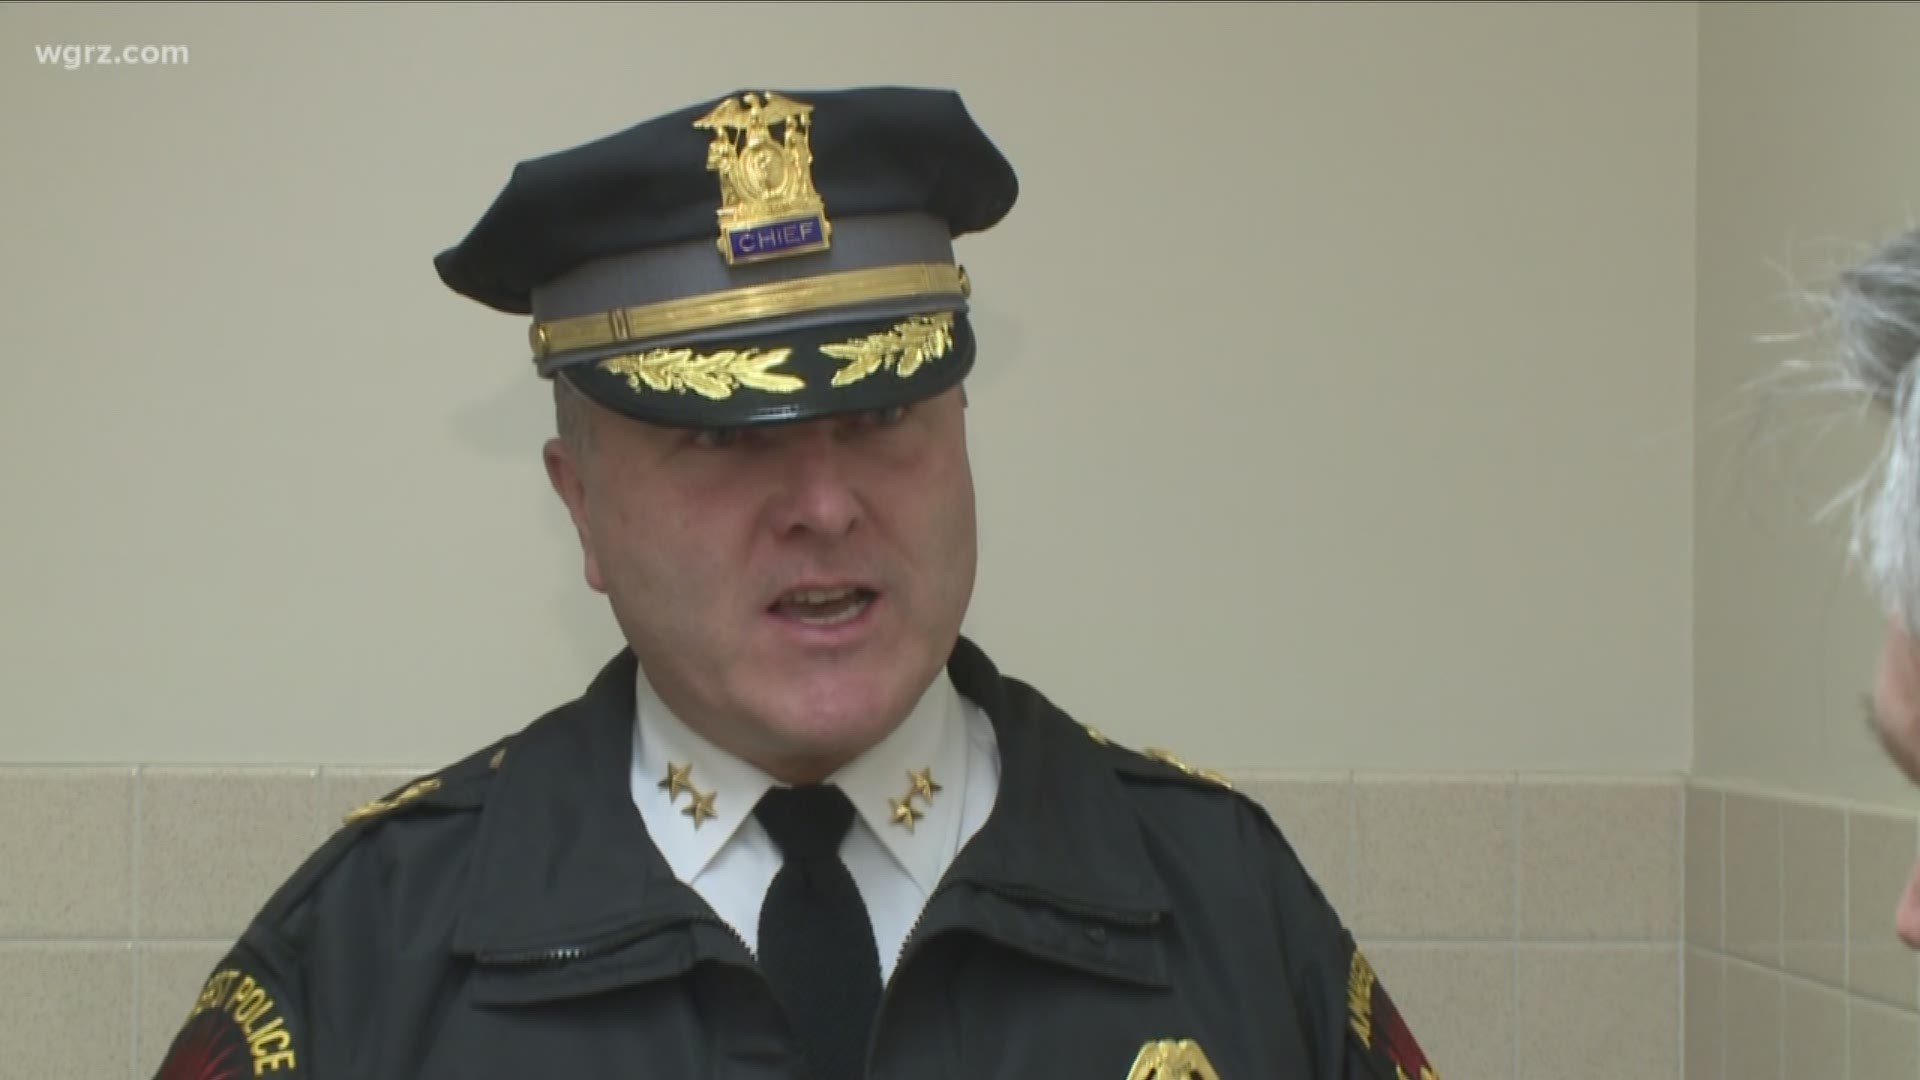 WHO HELPED A SUSPENDED COP SNEAK INTO AMHERST TOWN COURT YESTERDAY? THE AMHERST POLICE CHIEF IS DETERMINED TO FIND OUT.